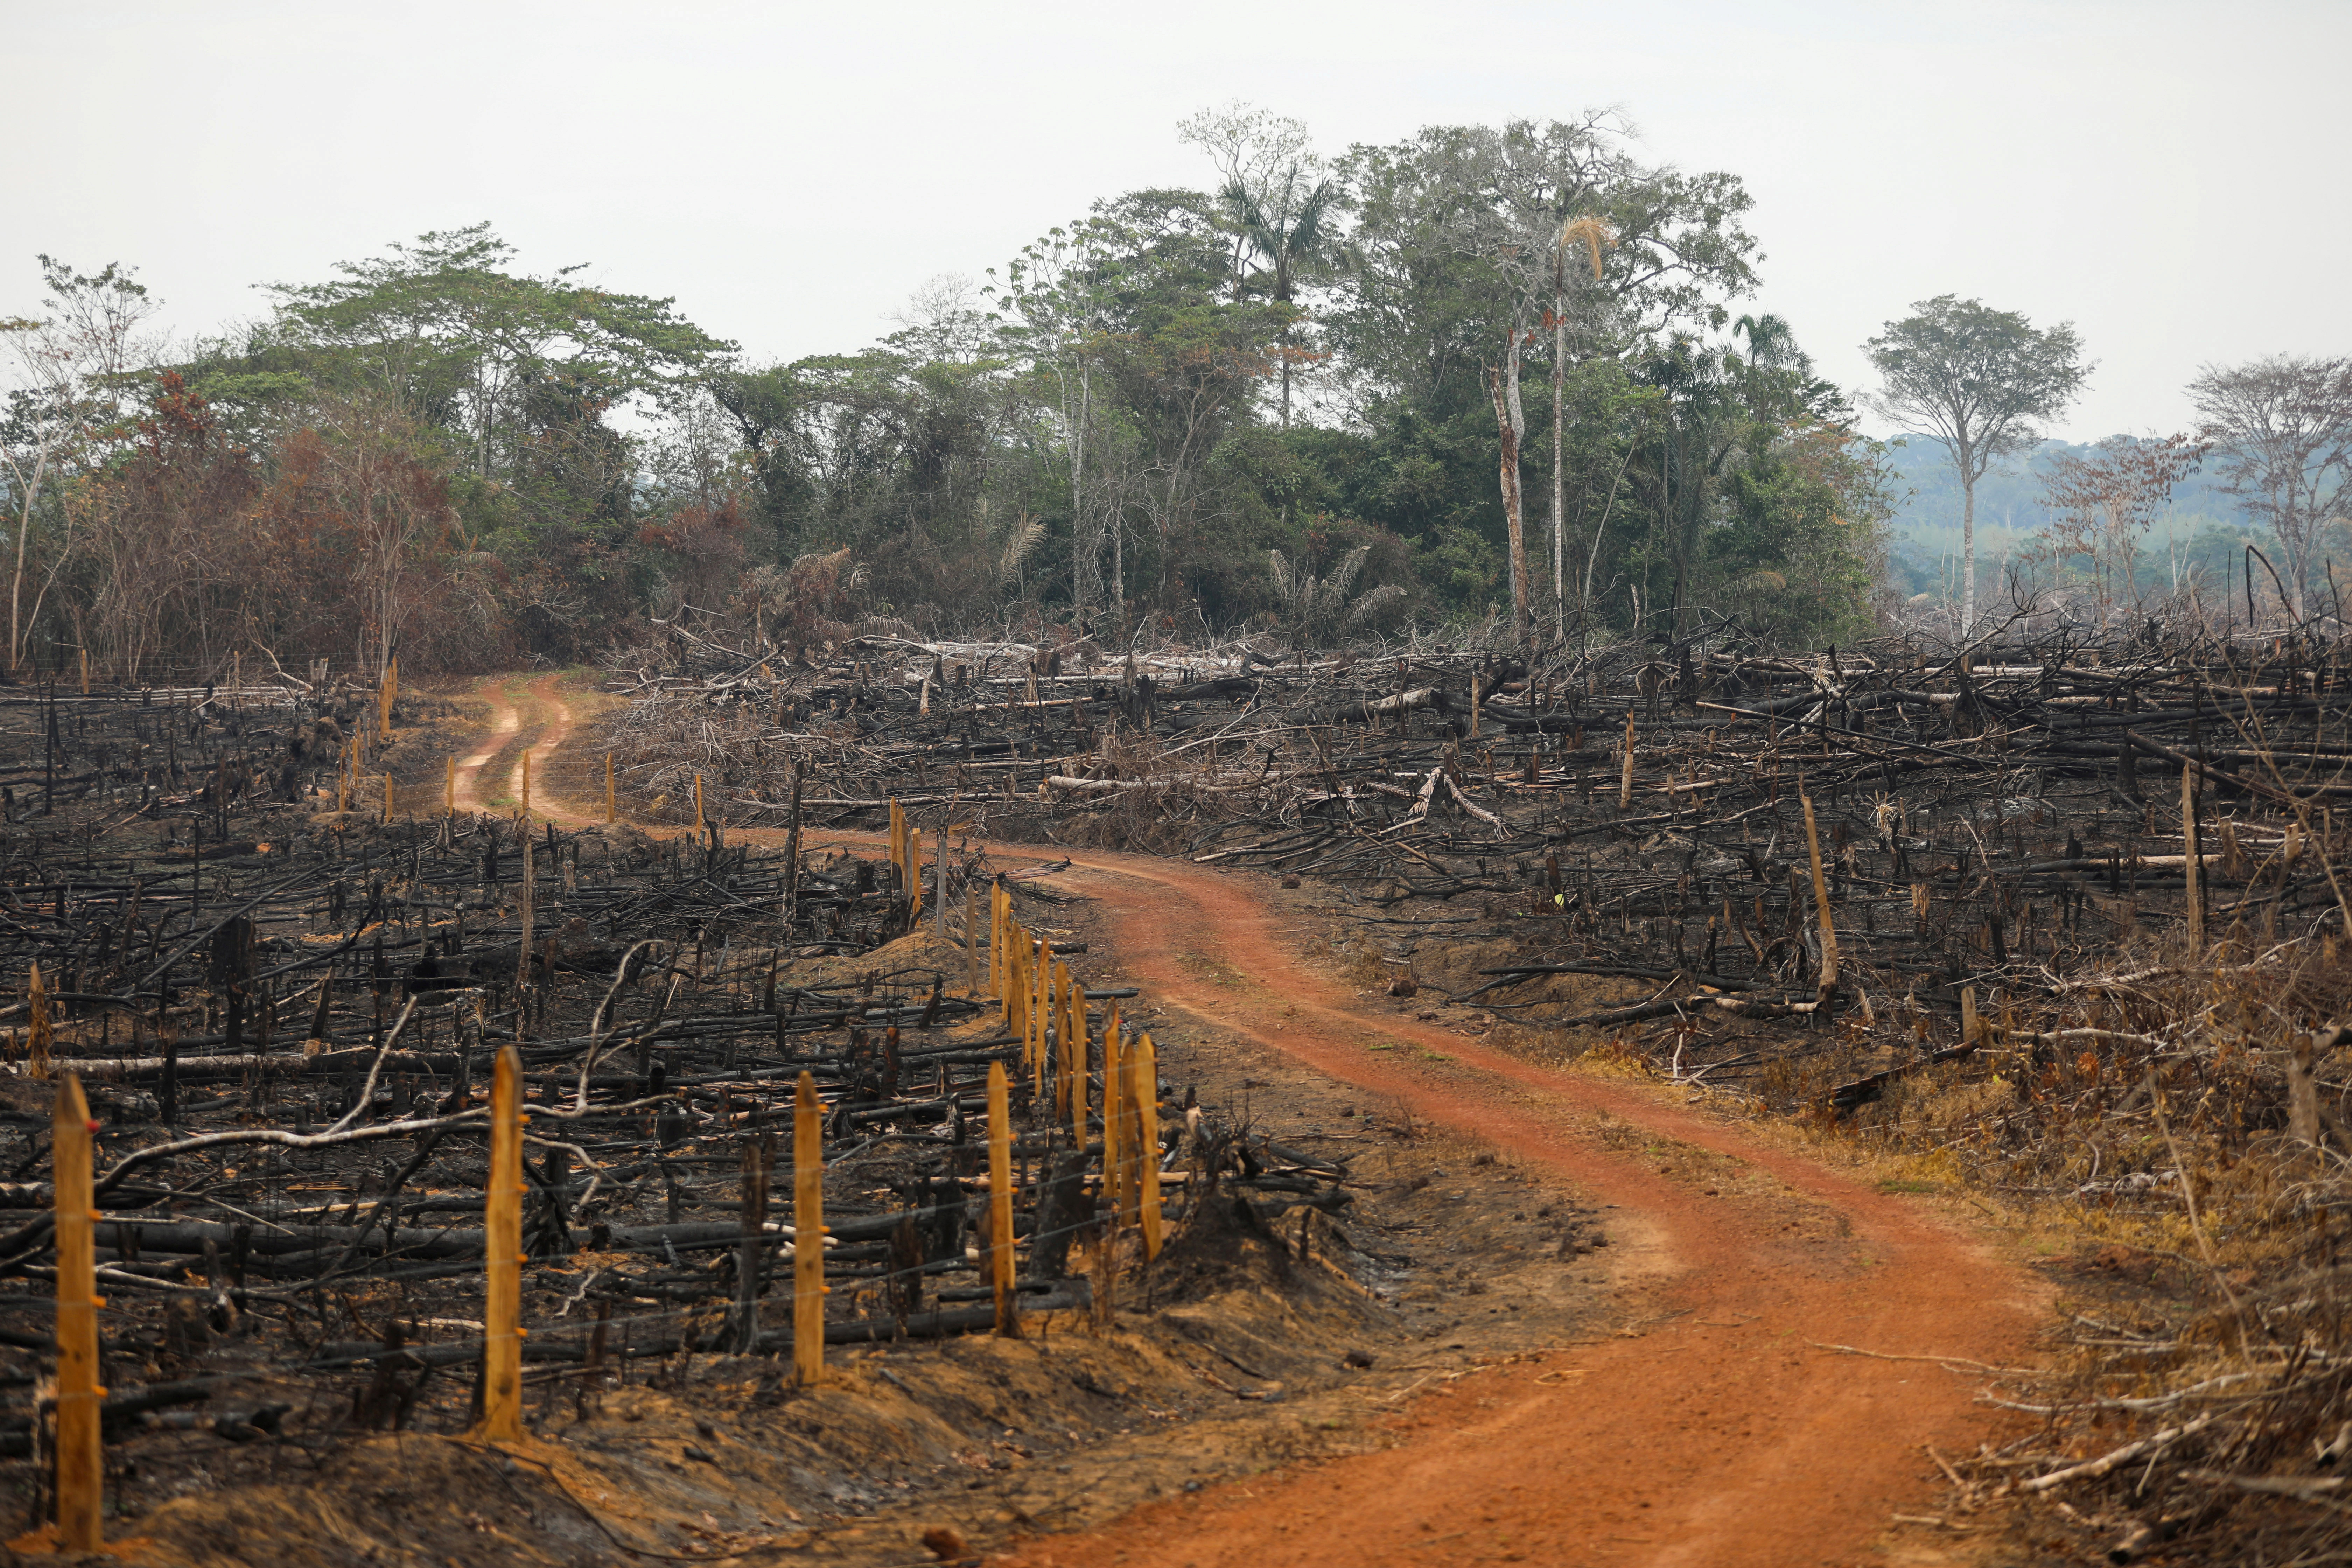 A view of an illegal road made during the deforestation of the Yari plains, in Caqueta